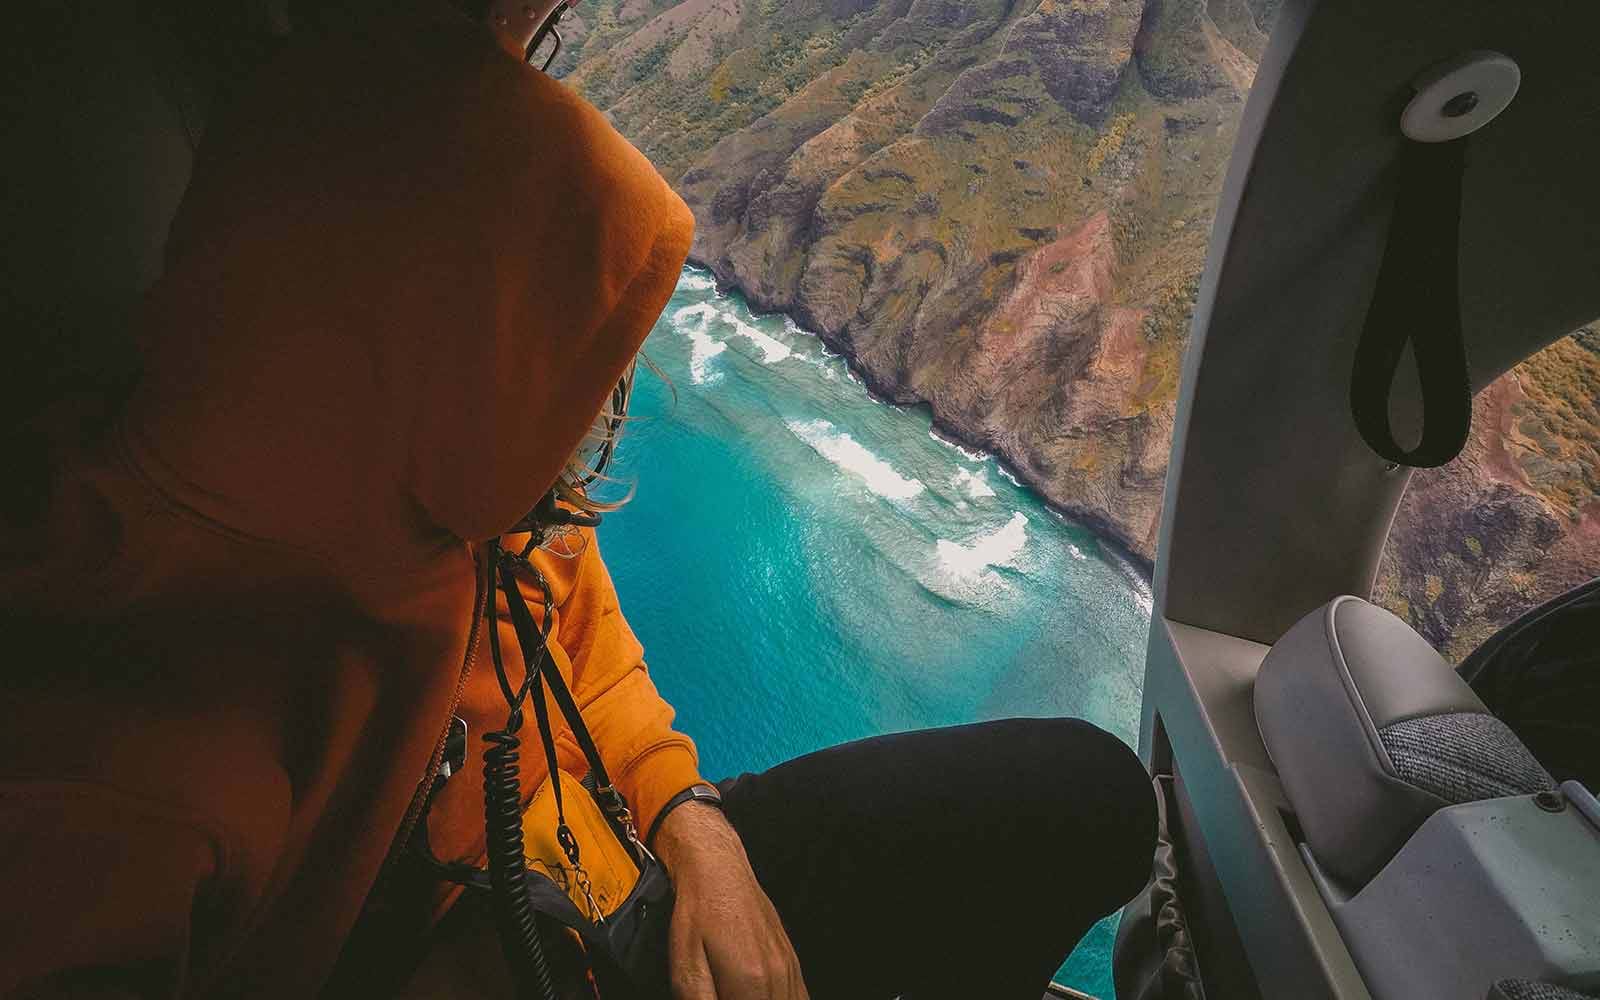 Person riding in helicopter over water and mountain